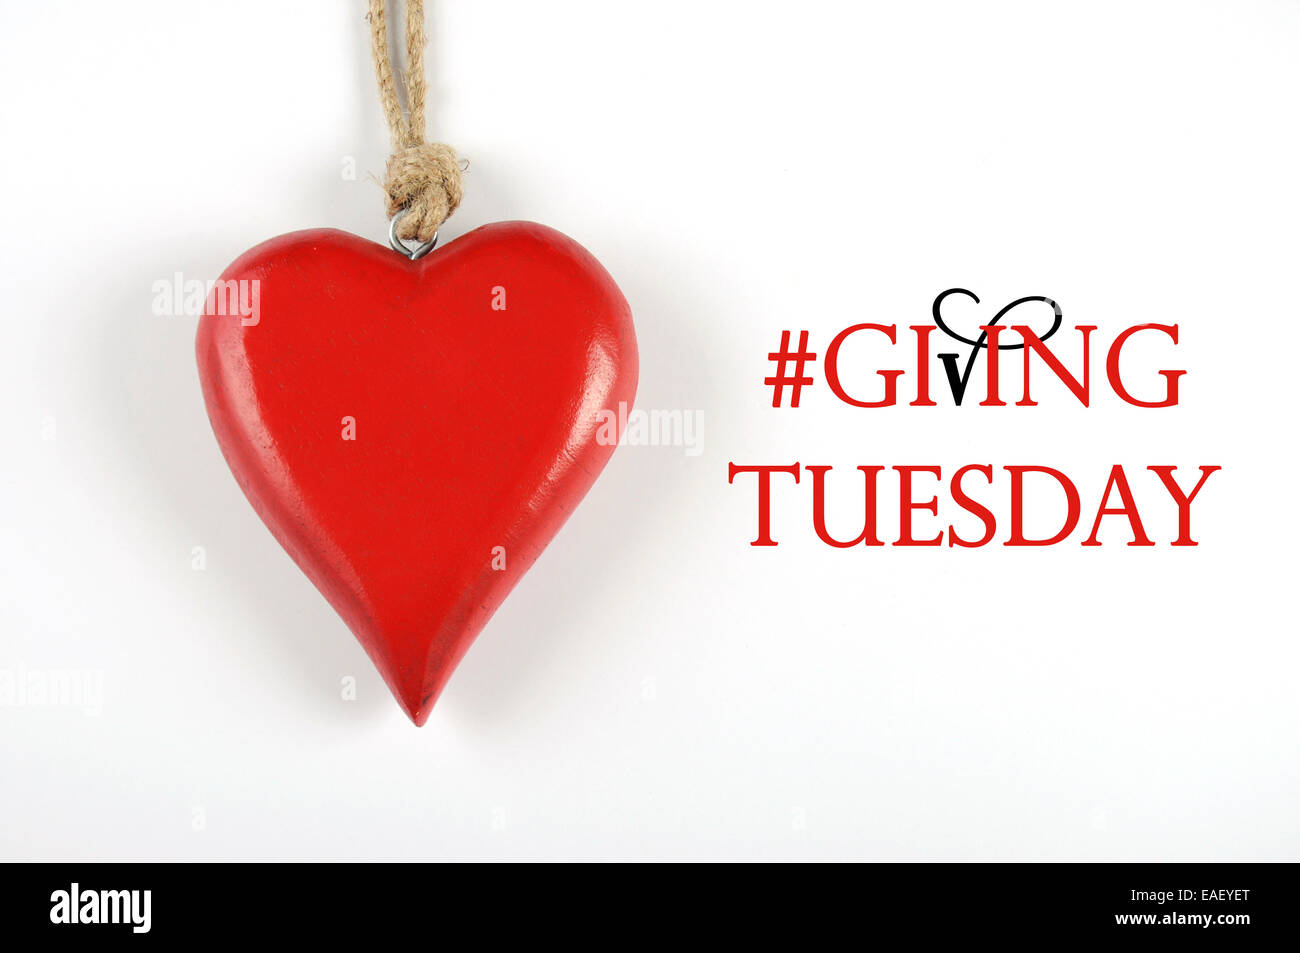 Giving Tuesday philanthropy day after Black Friday shopping message sign with red heart and sample text. Stock Photo